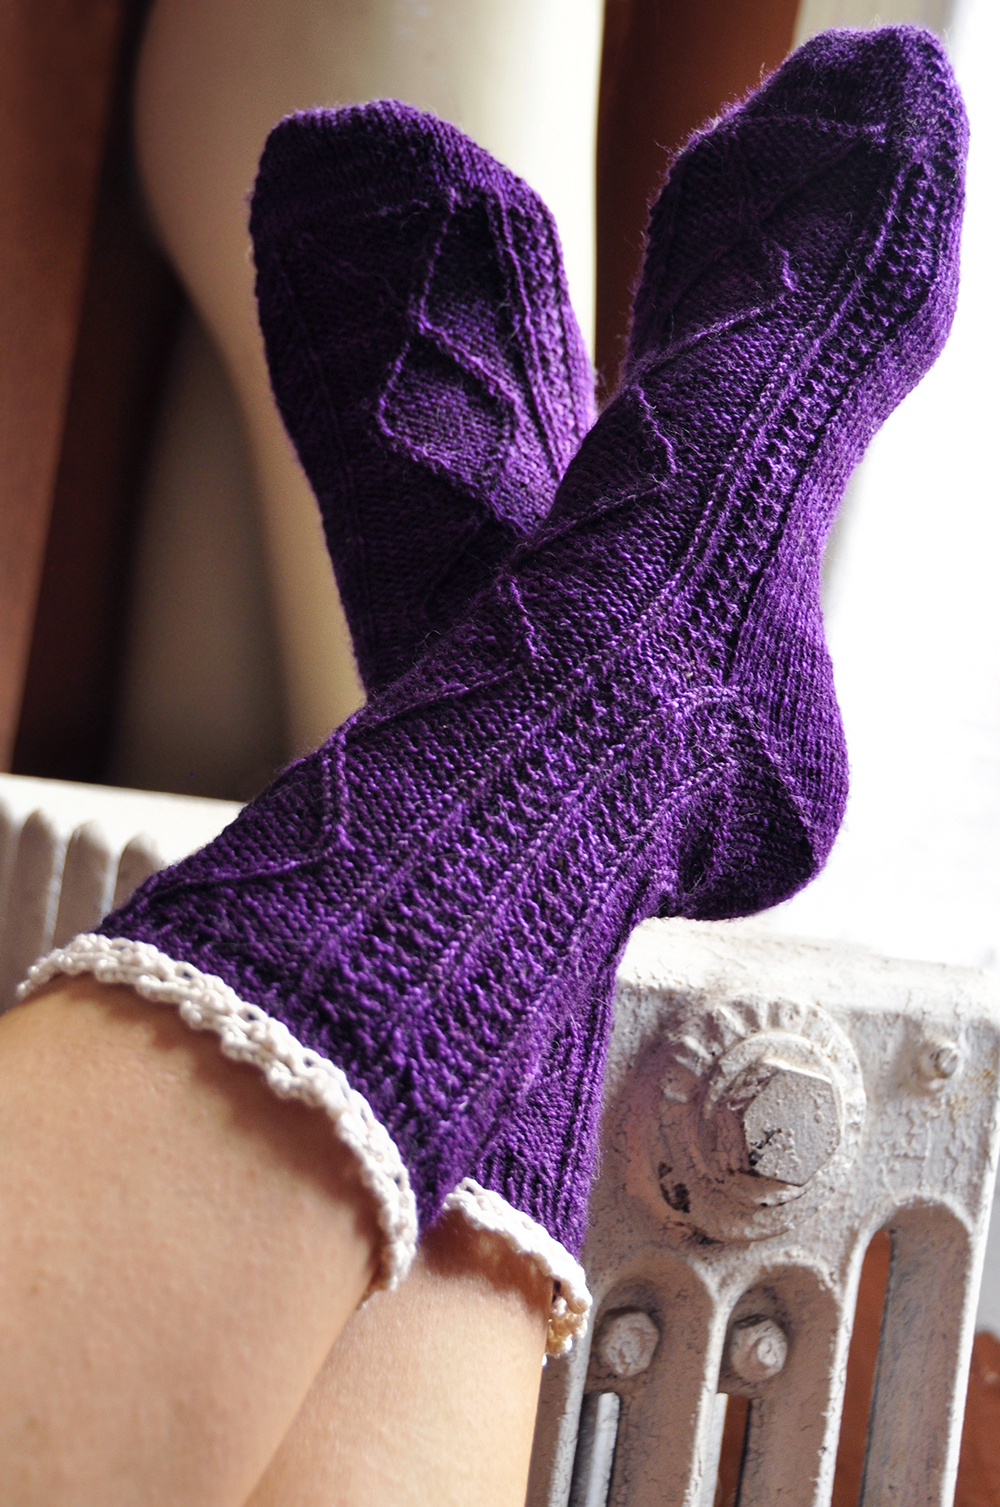 “Diamond in the Ruffle” Cable Knit Socks